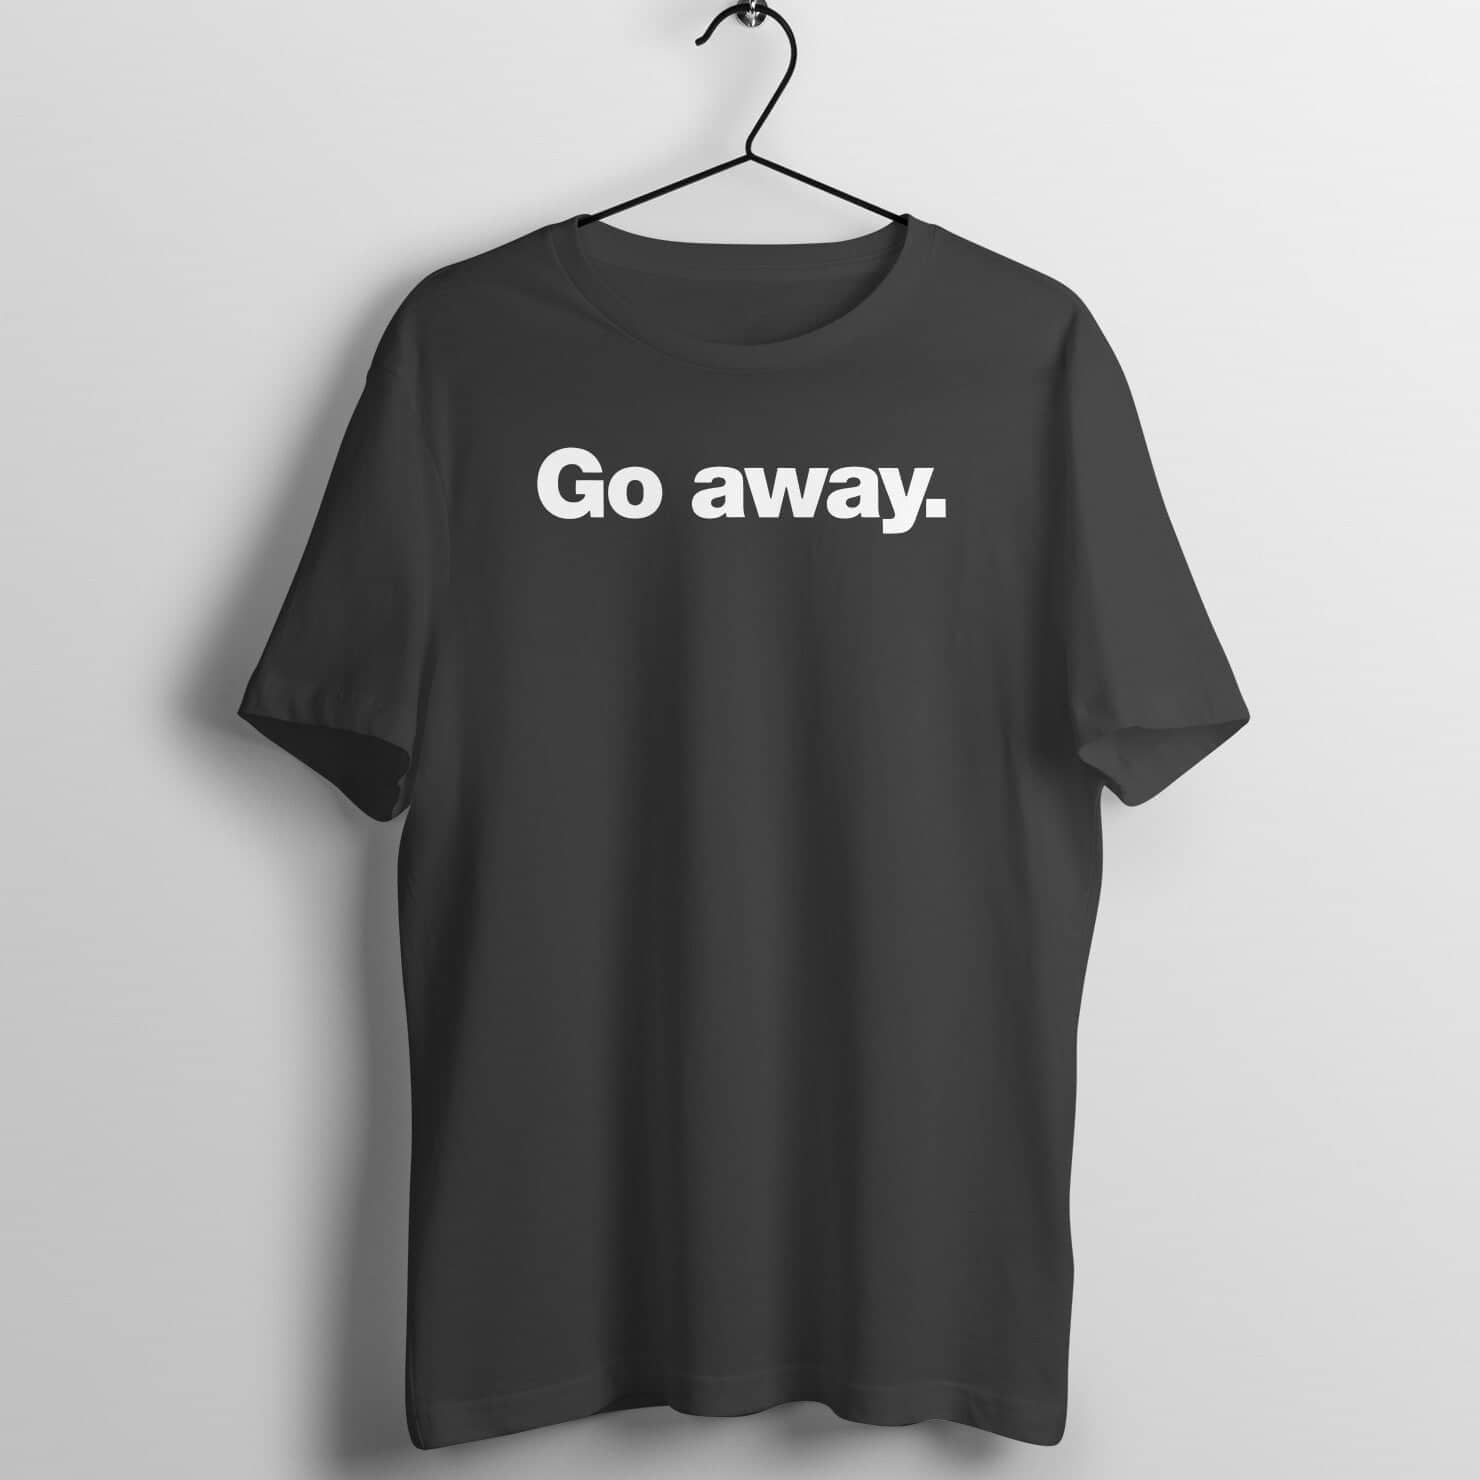 Go Away. Exclusive Black T Shirt for Men and Women freeshipping - Catch My Drift India